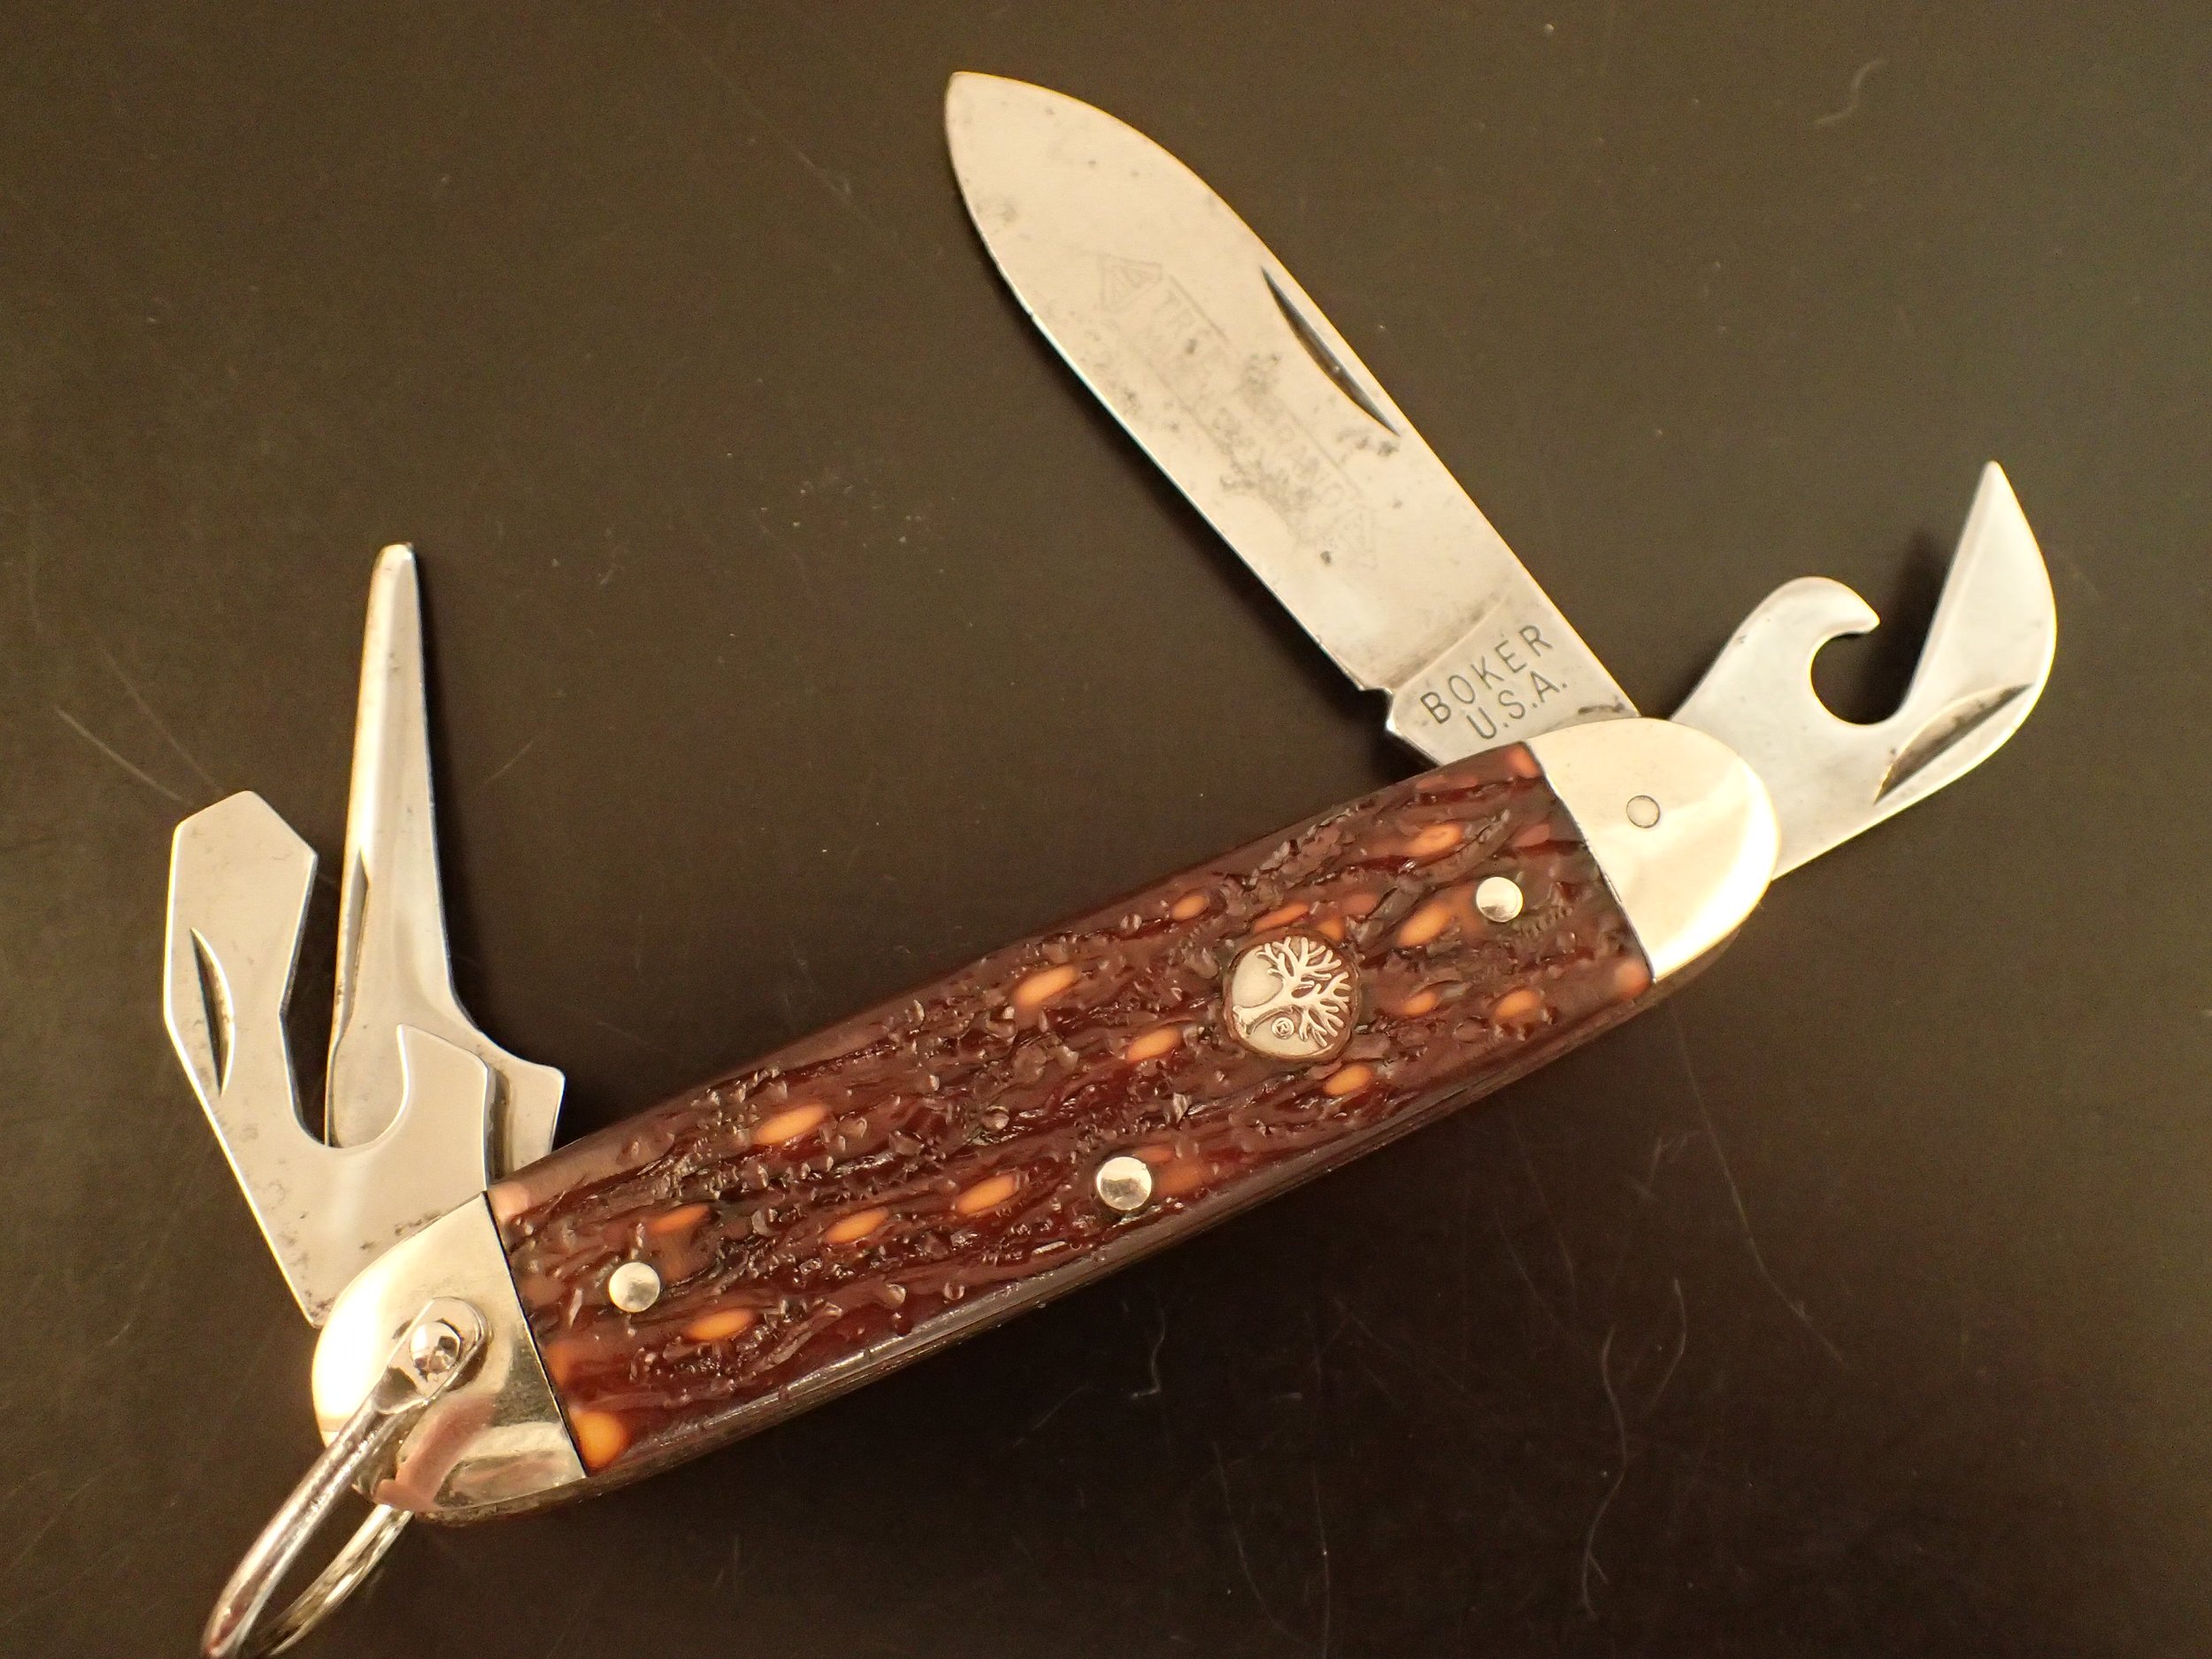 Vintage Boker Tree Brand Classic 2 Blade Pocket Knife  NICOLLET, MN - Knife  Collection - Includes W.R. Case & Sons, Schrade, CAMILLUS Military Fighting  Knife and Victorinox Knives - HOT WHEELS